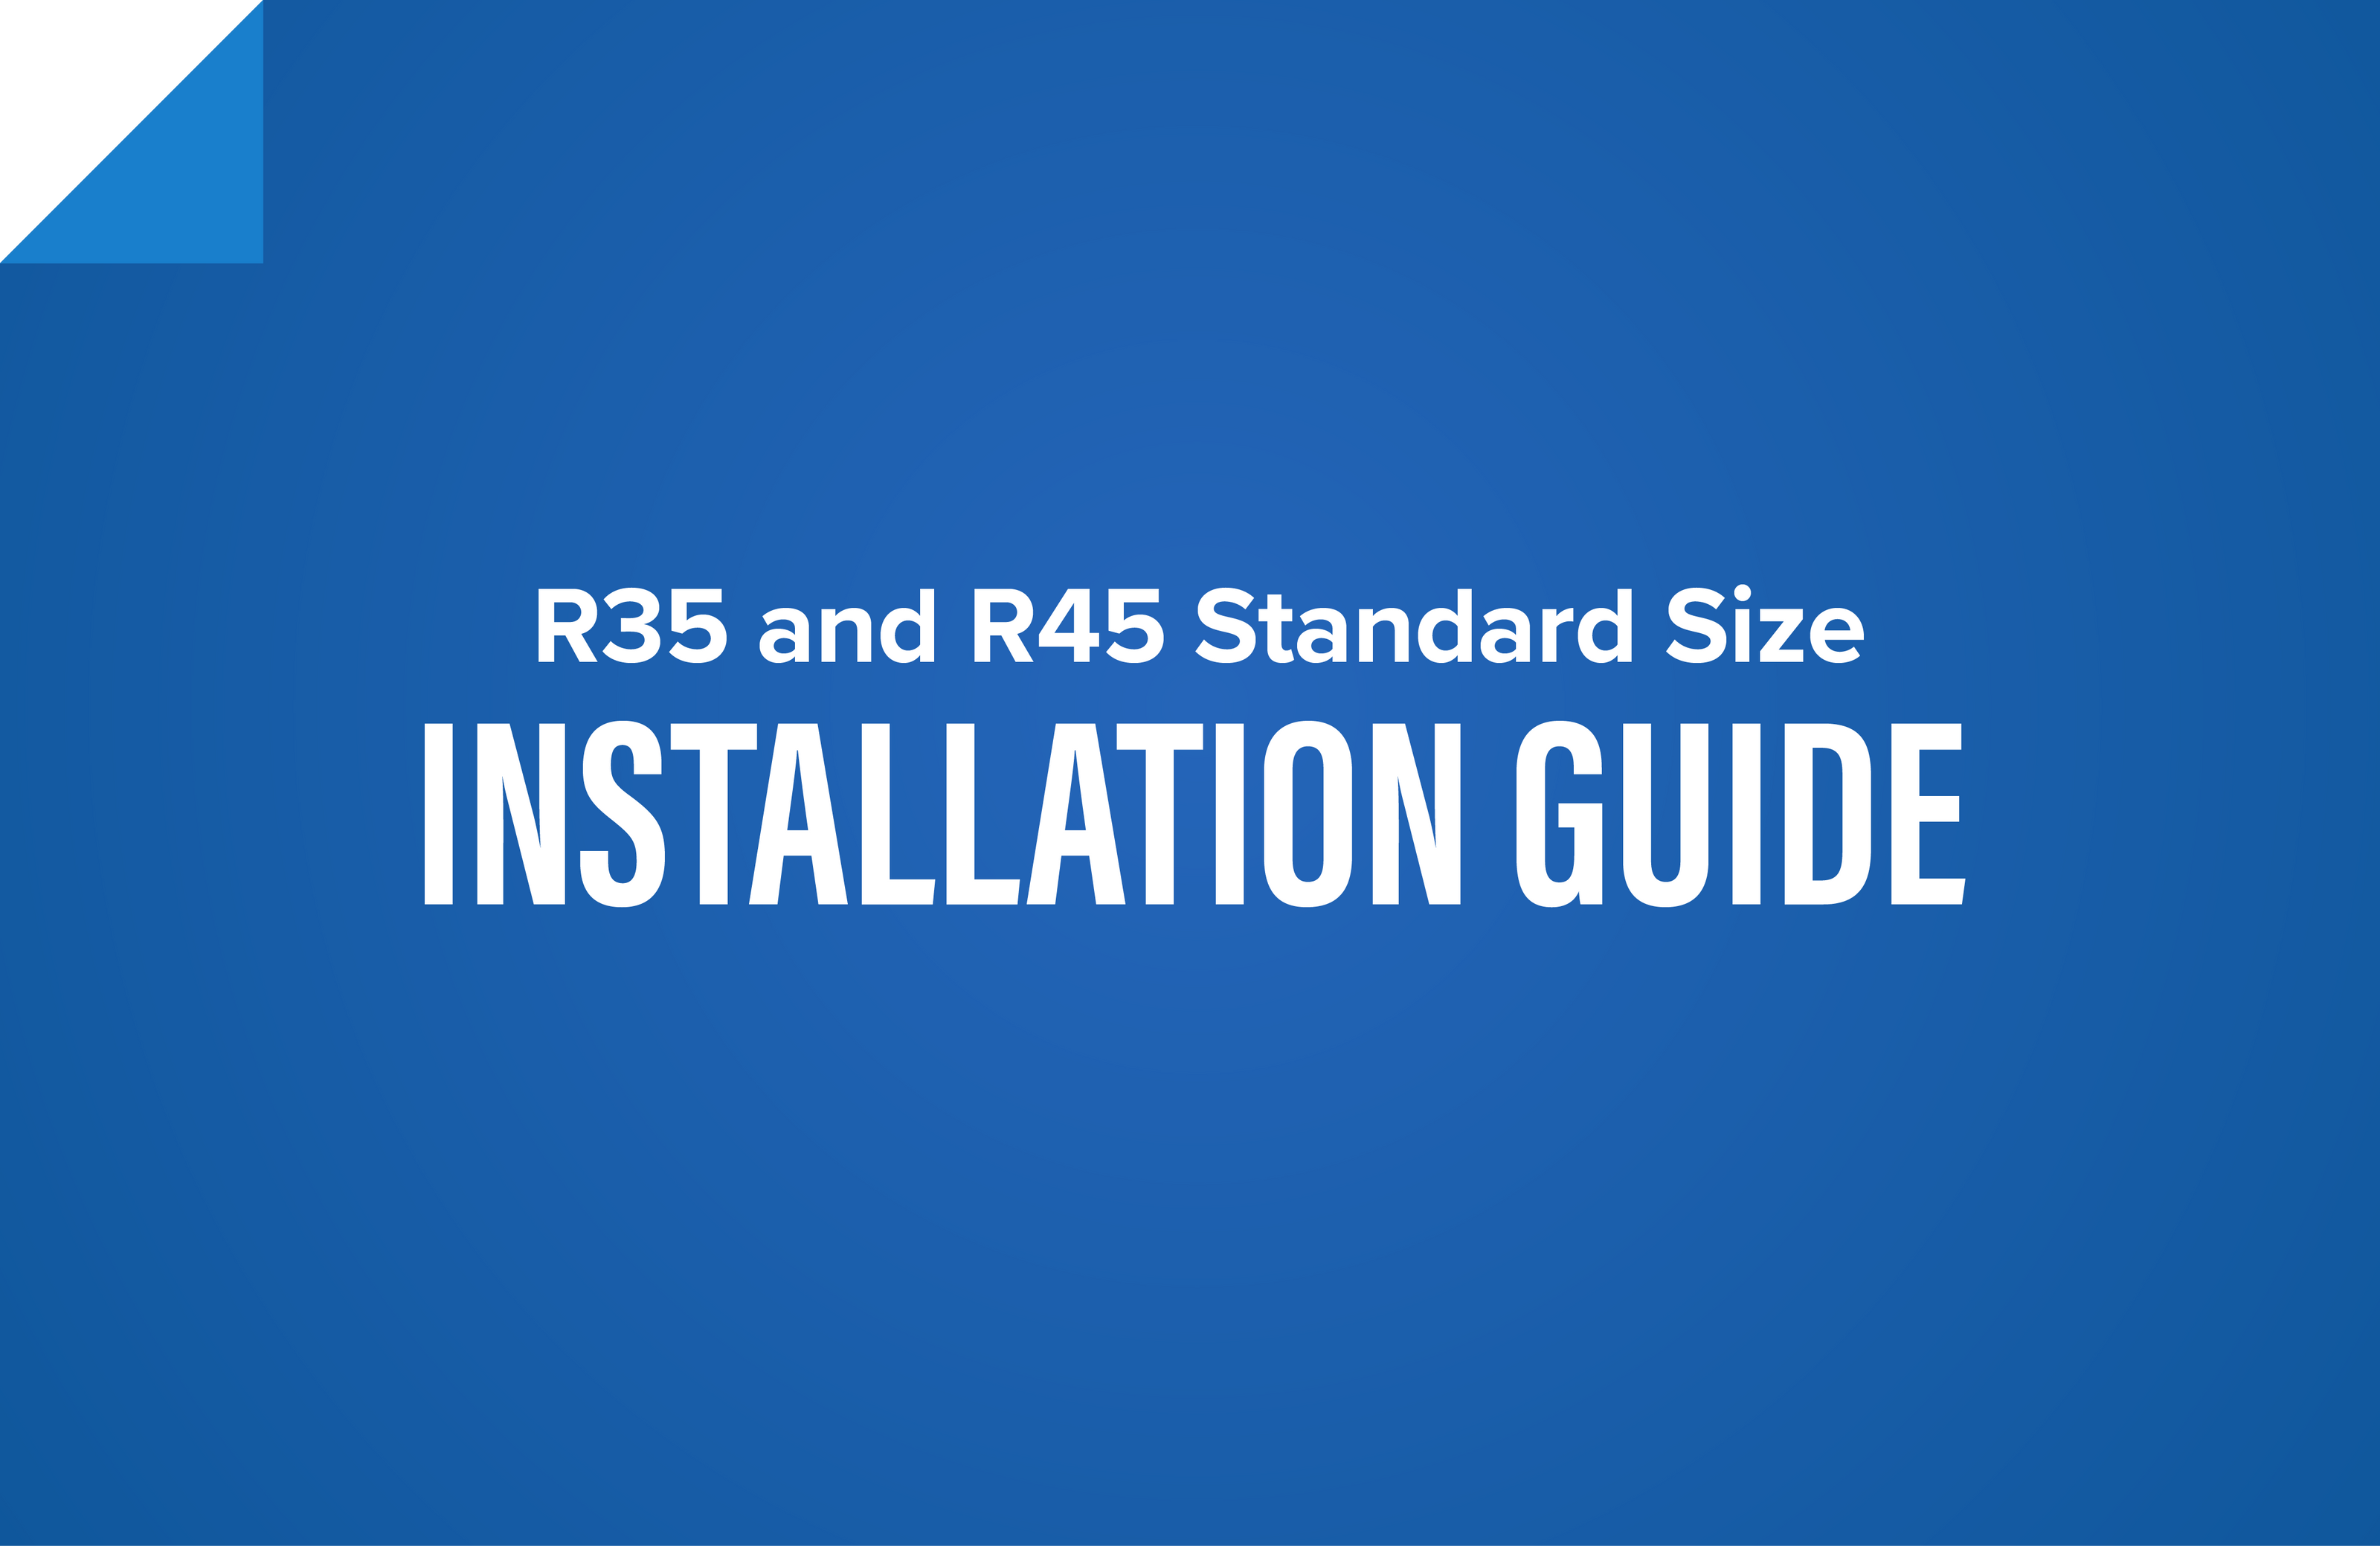 R35 and R45 Standard Size - Installation Guide